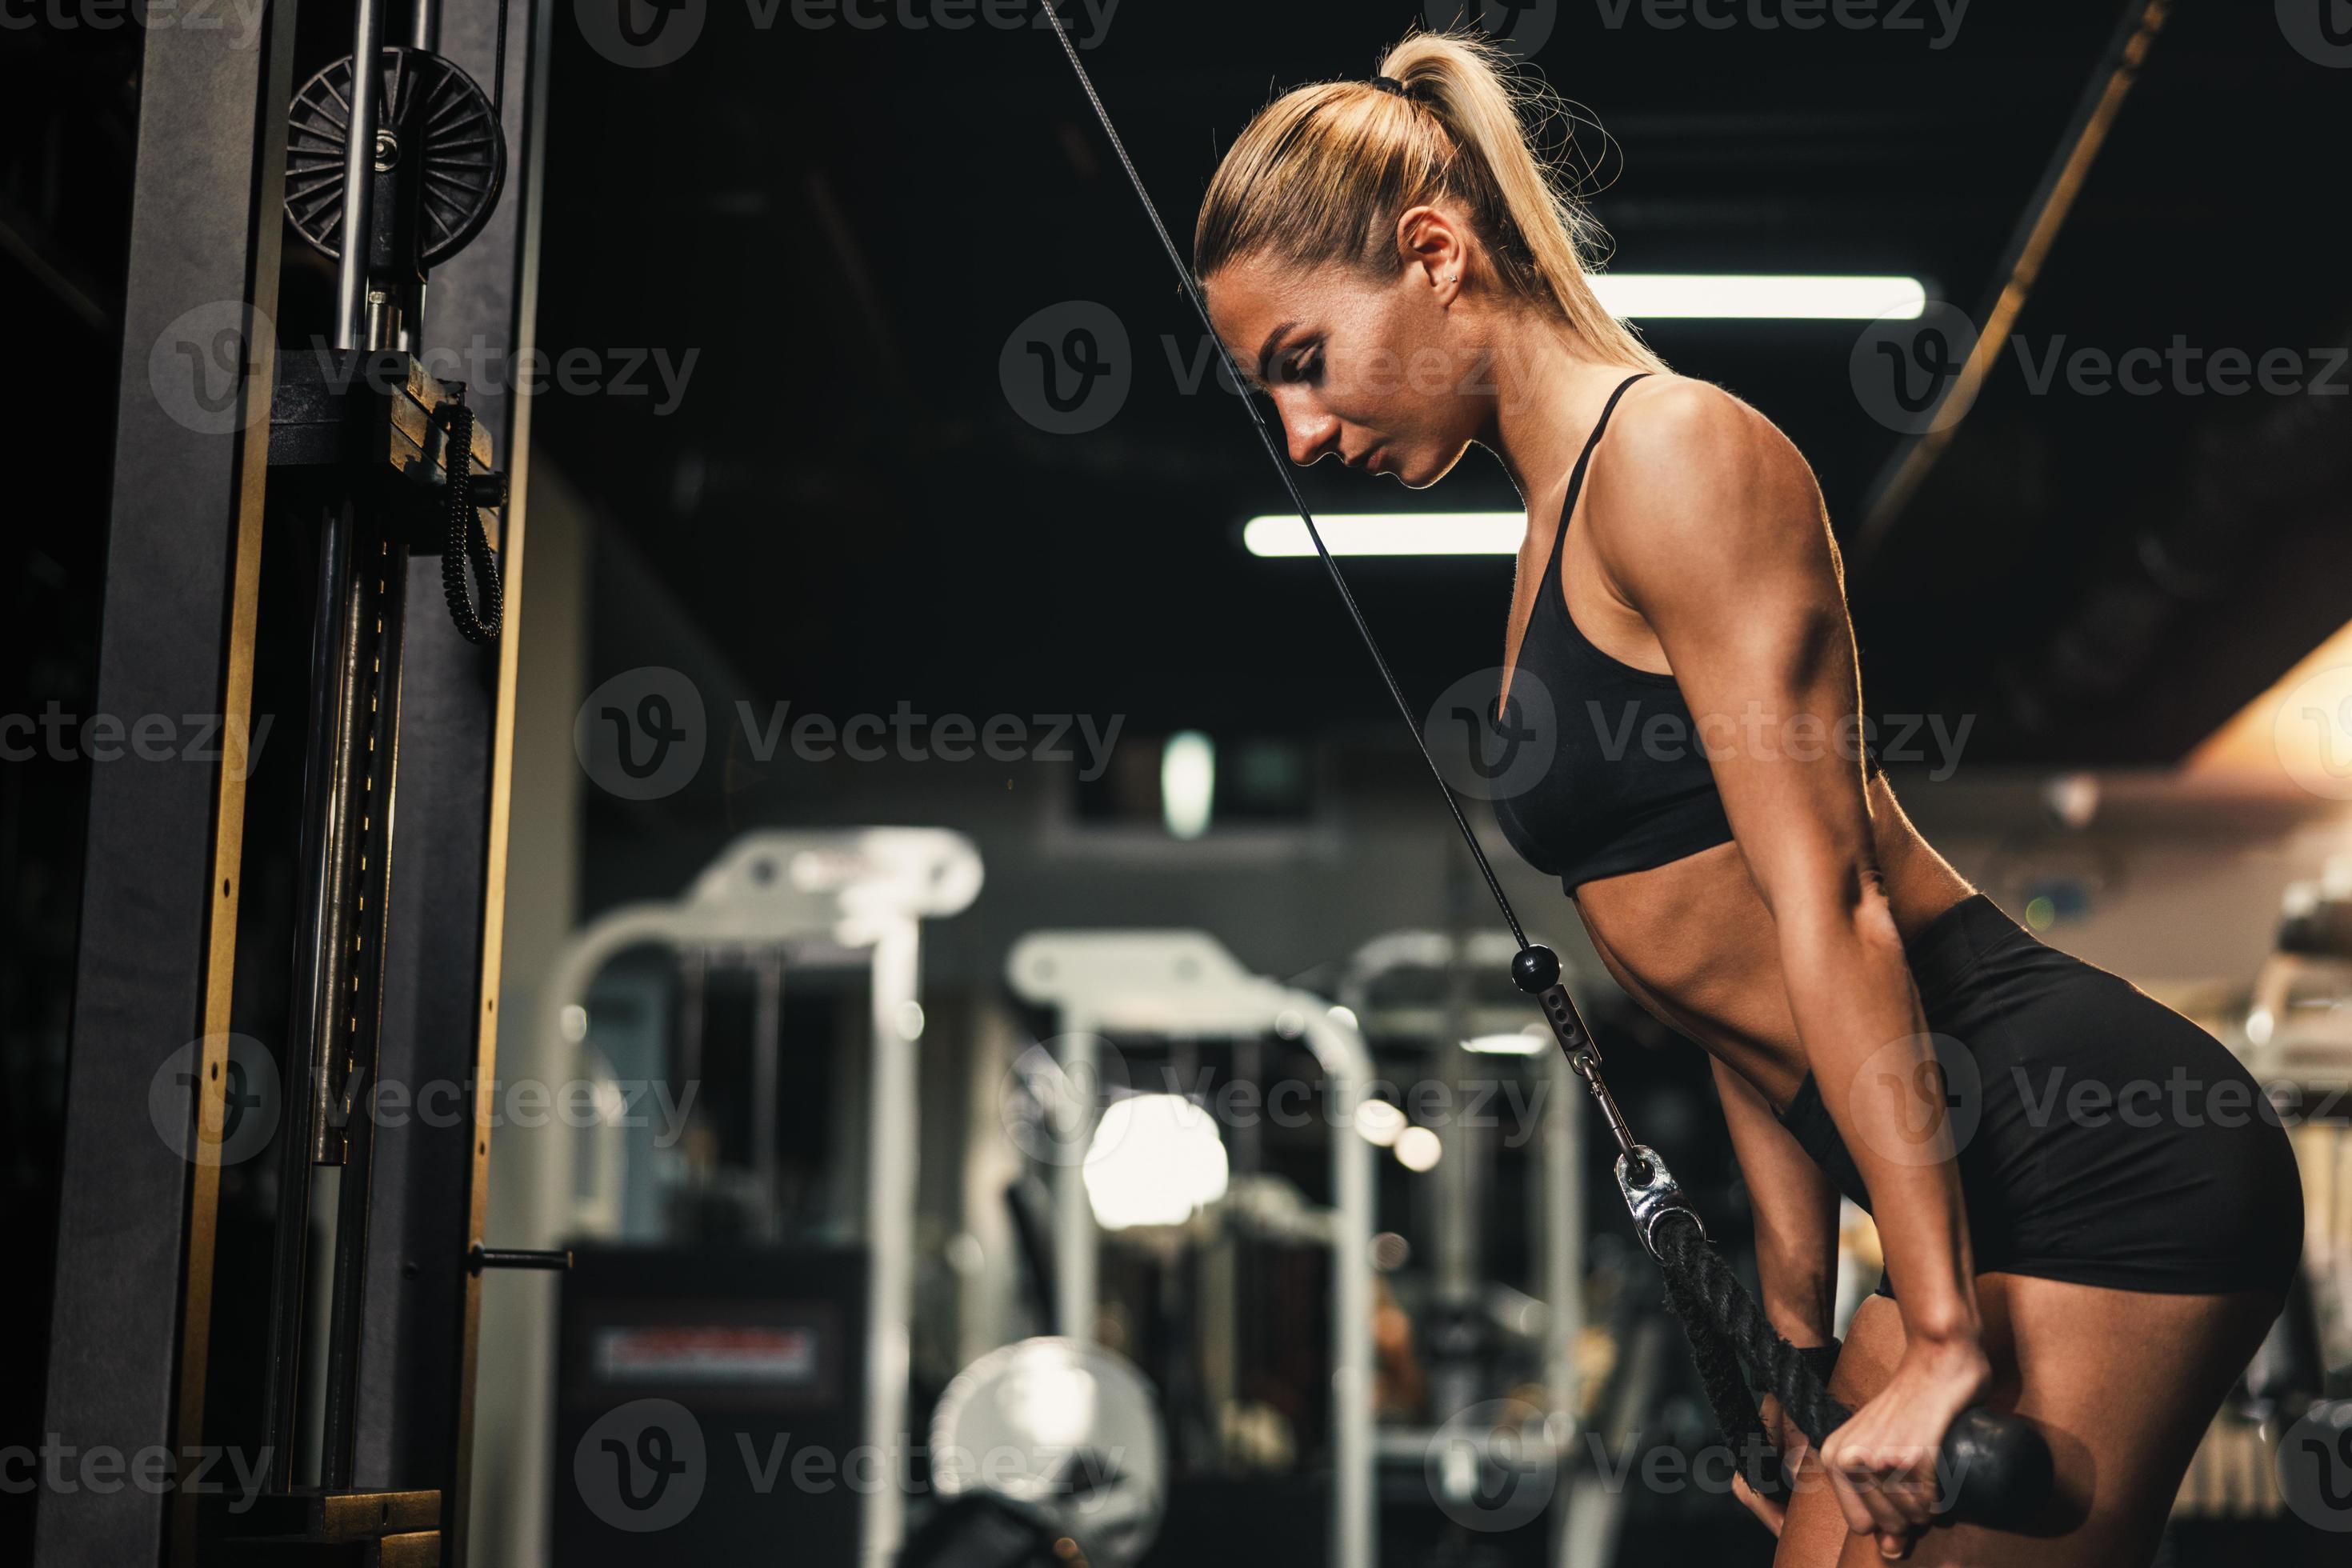 Woman Doing Training On Machine For Her Triceps Muscle At The Gym 14227902  Stock Photo at Vecteezy